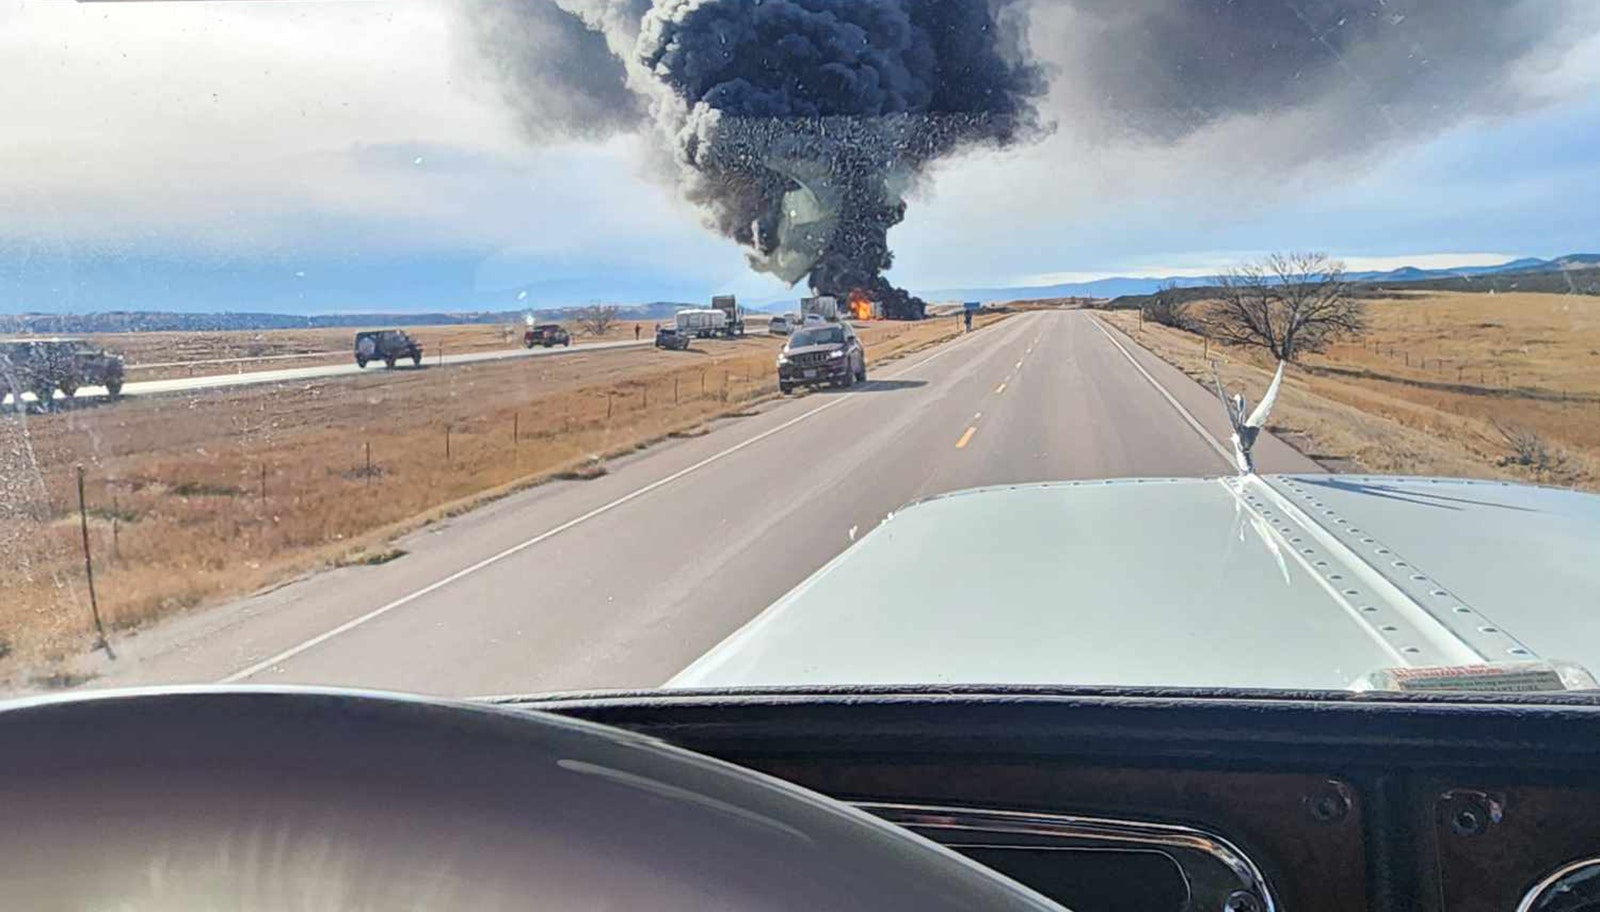 Smoke from this fully-involved semitrailer fire on Interstate 90 near the South Dakota border was visible for 20 miles, said trucker Daniel Ratzlaff.